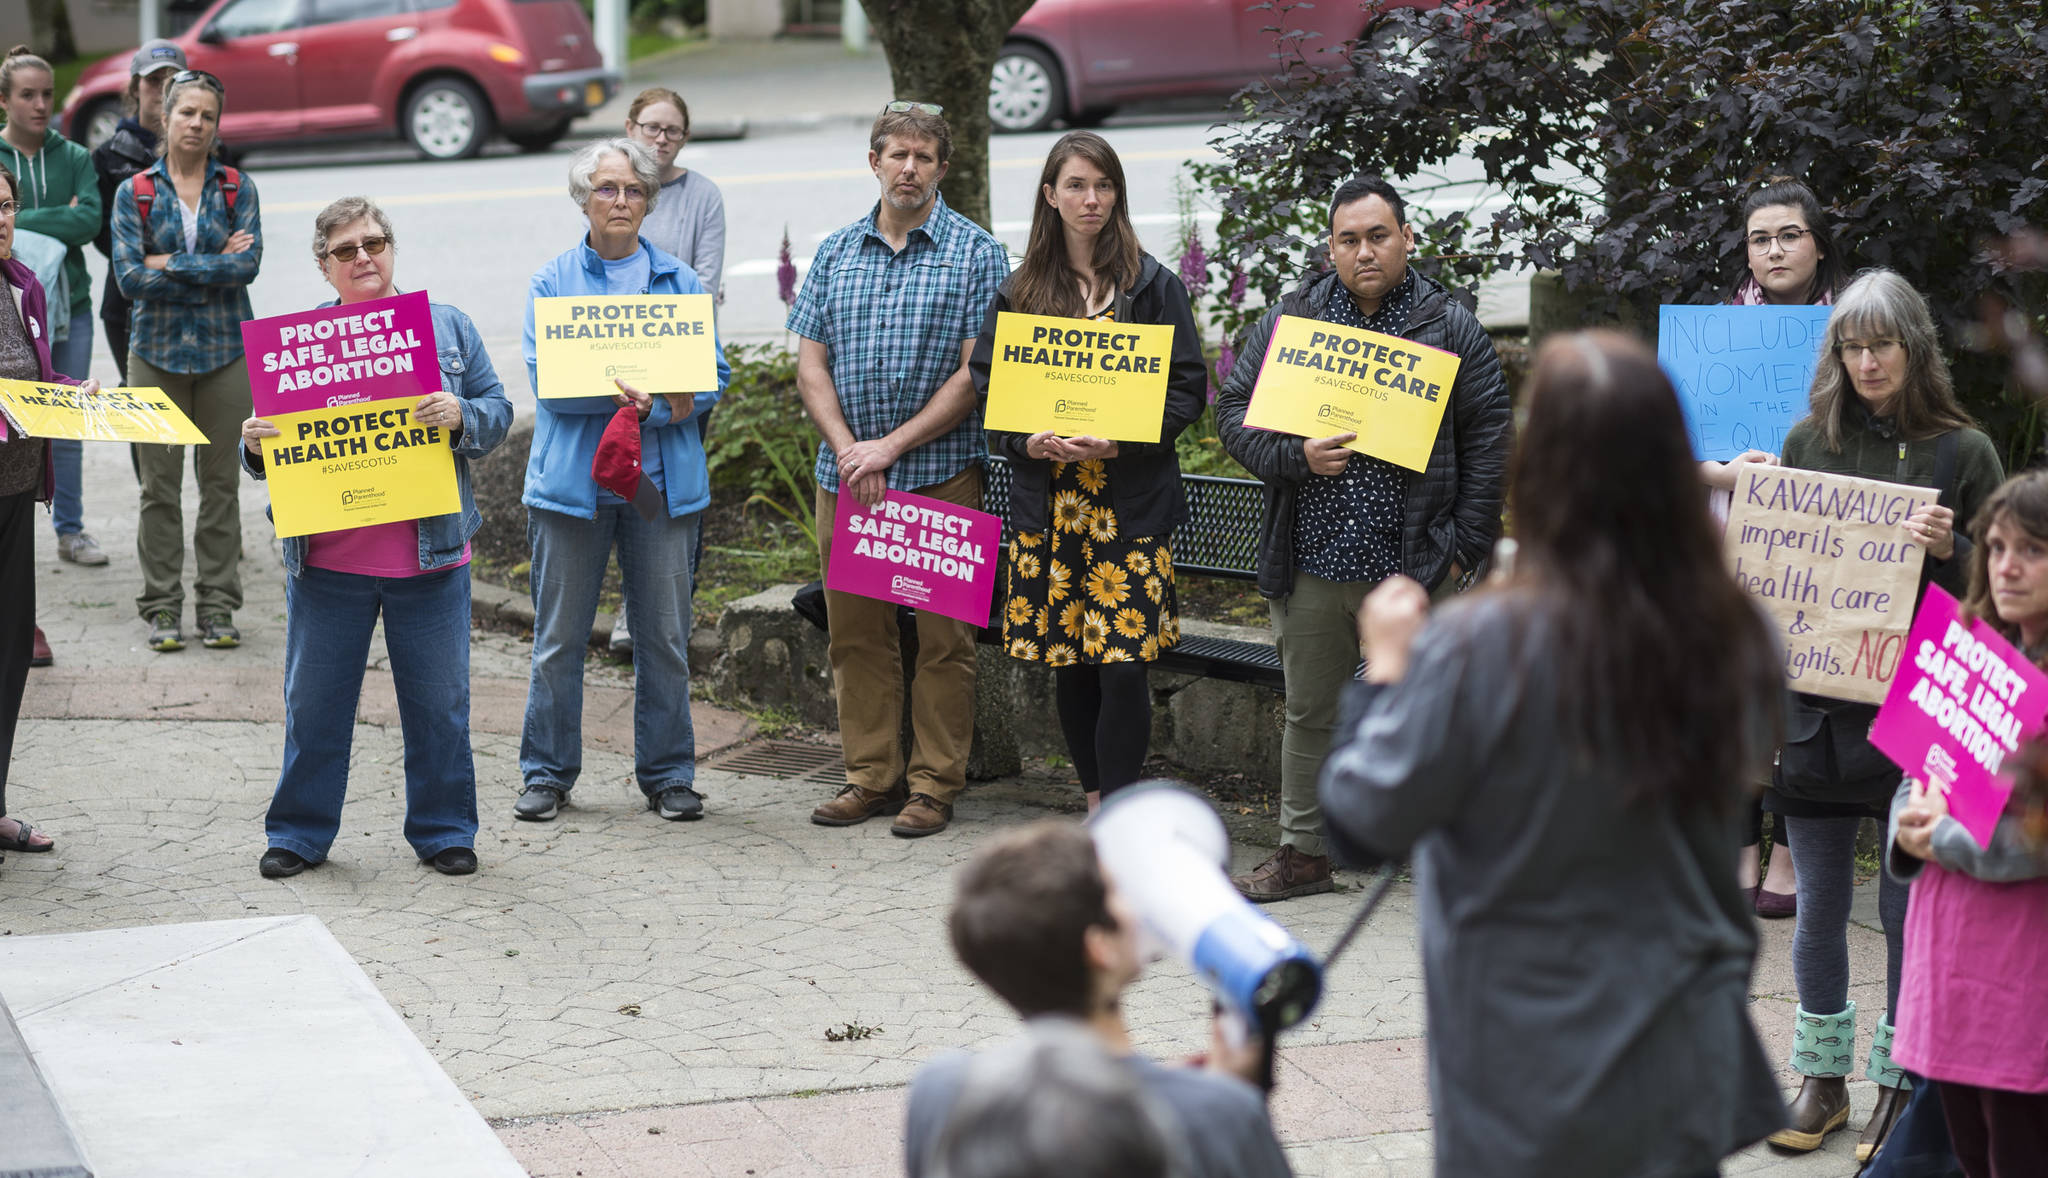 Abortion rights supporters gather in the Dimond Courthouse Plaza on Wednesday, August 15, 2018, to listen to speakers against President Donald Trump’s selection of Judge Brett Kavanaugh to become an Associate Justice of the Supreme Court of the United States. (Michael Penn | Juneau Empire)